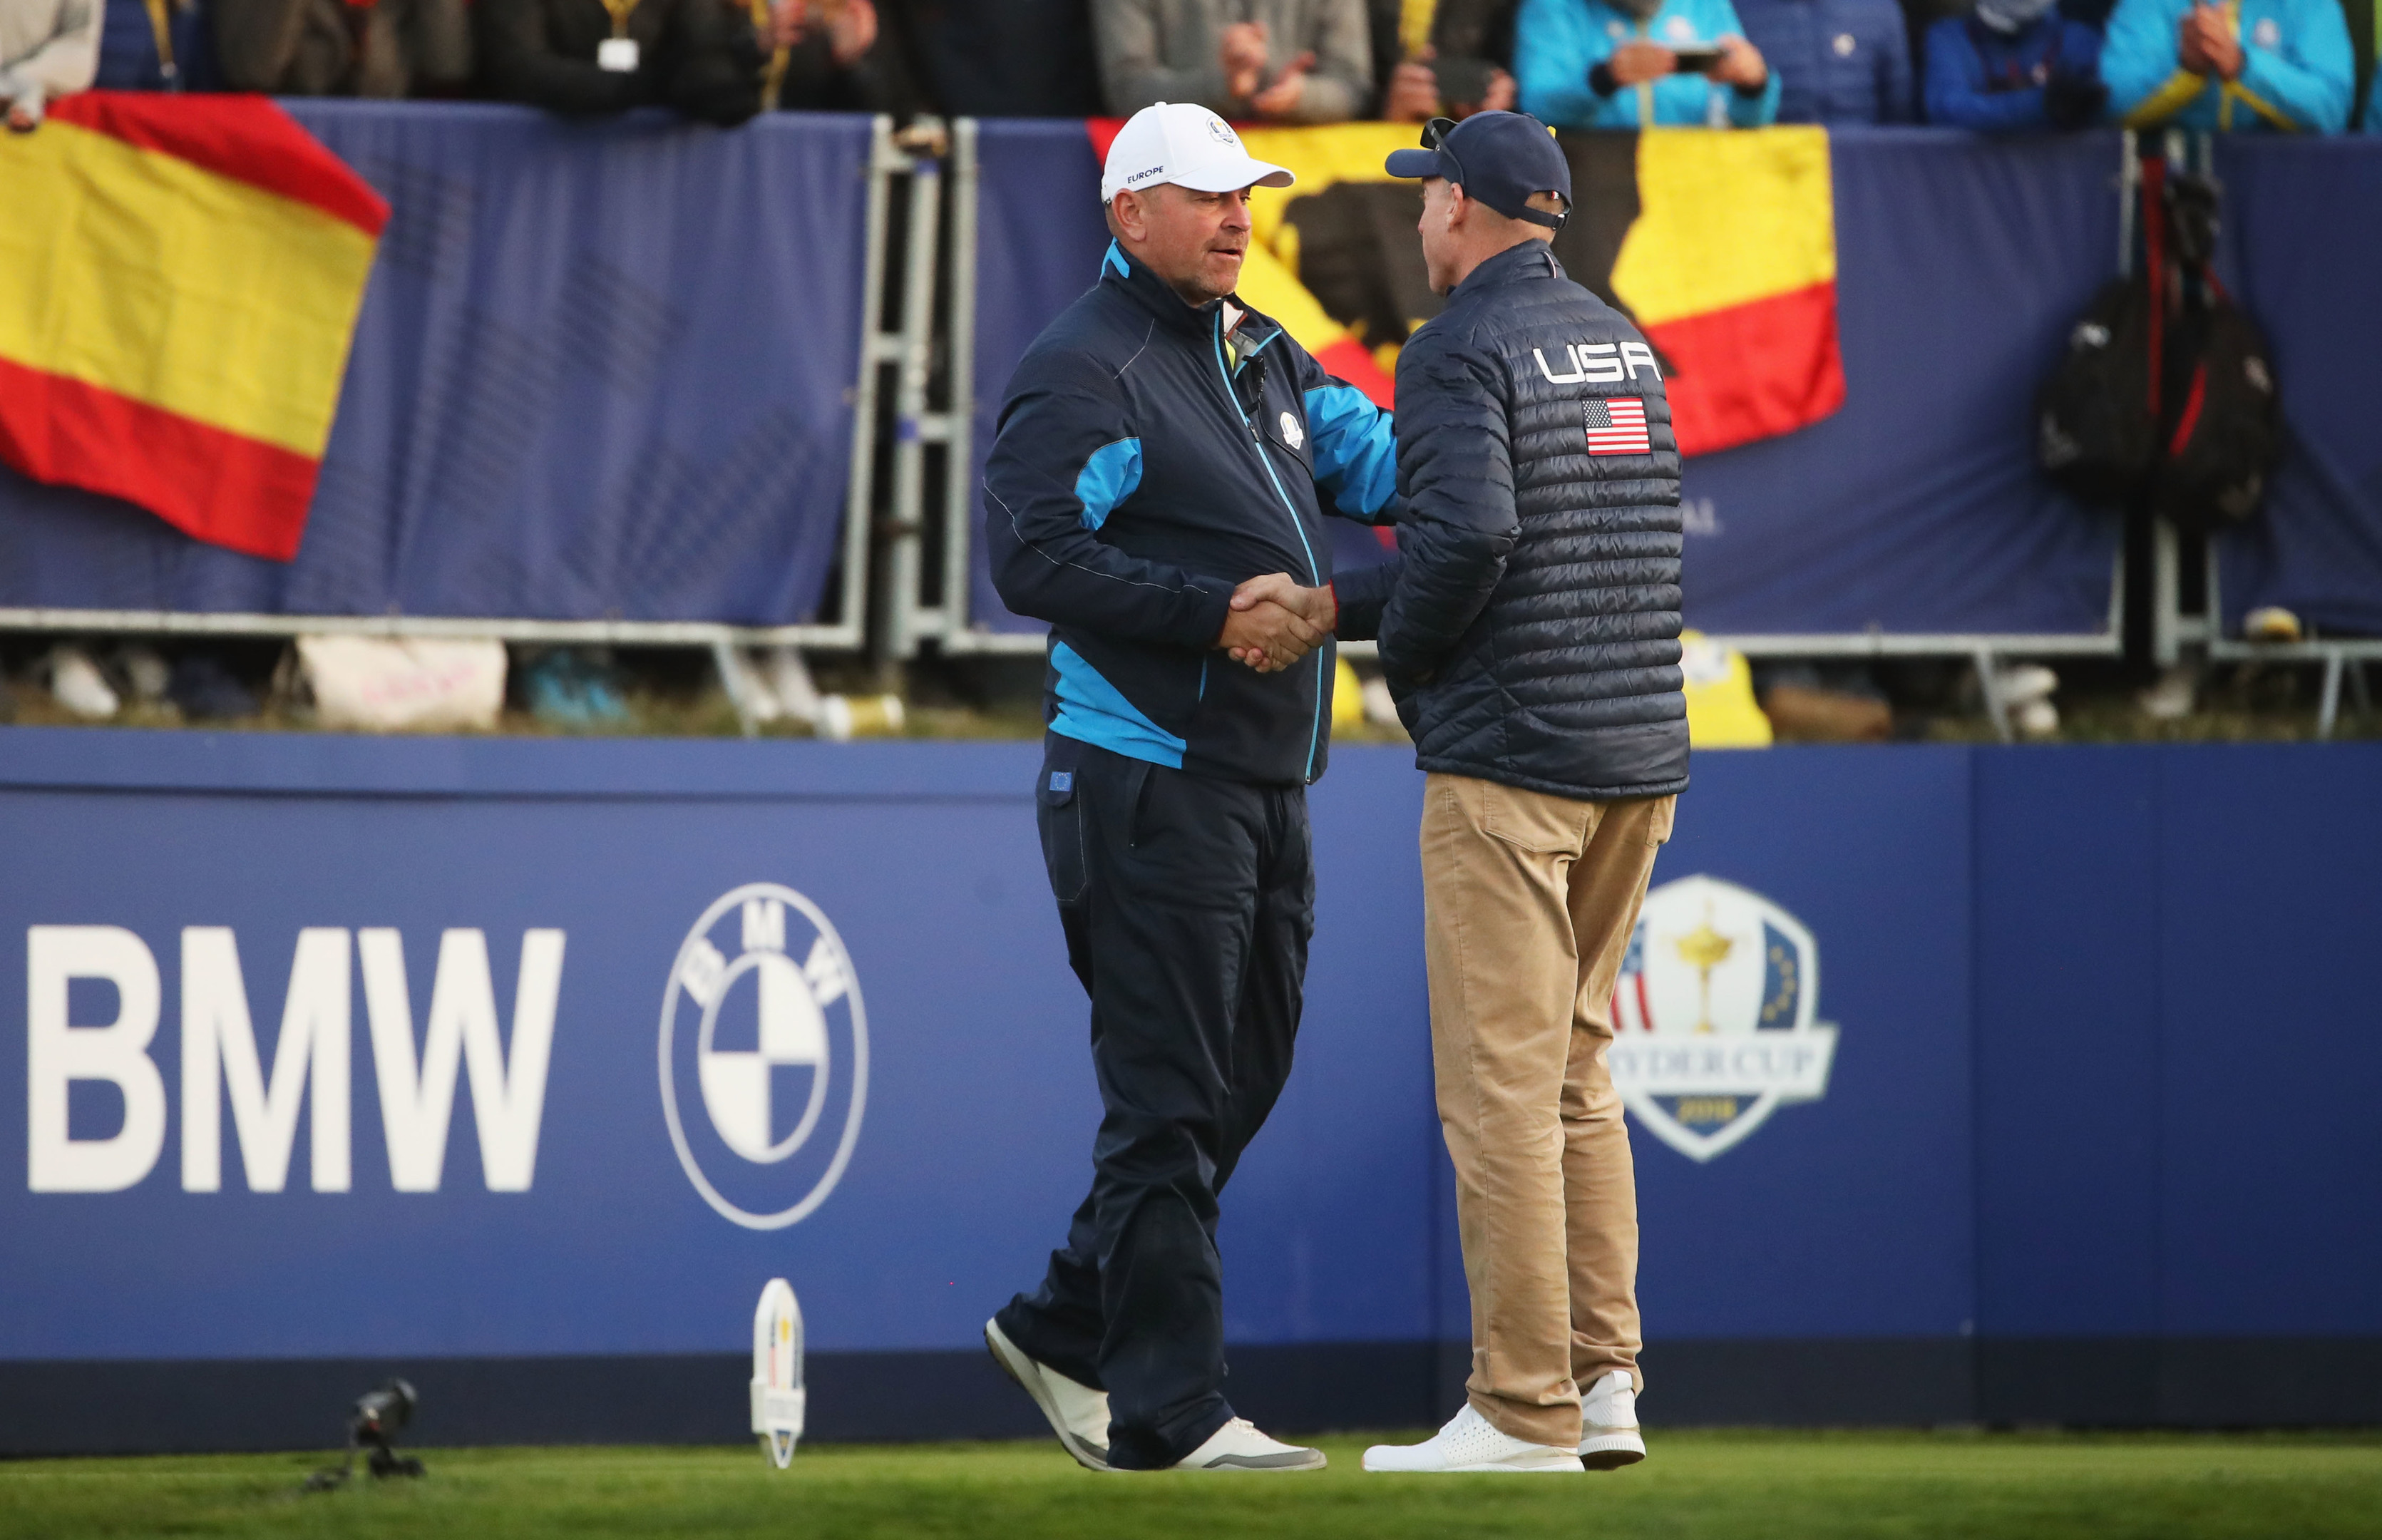 Thomas Bjorn and Jim Furyk have made their singles draw choices.